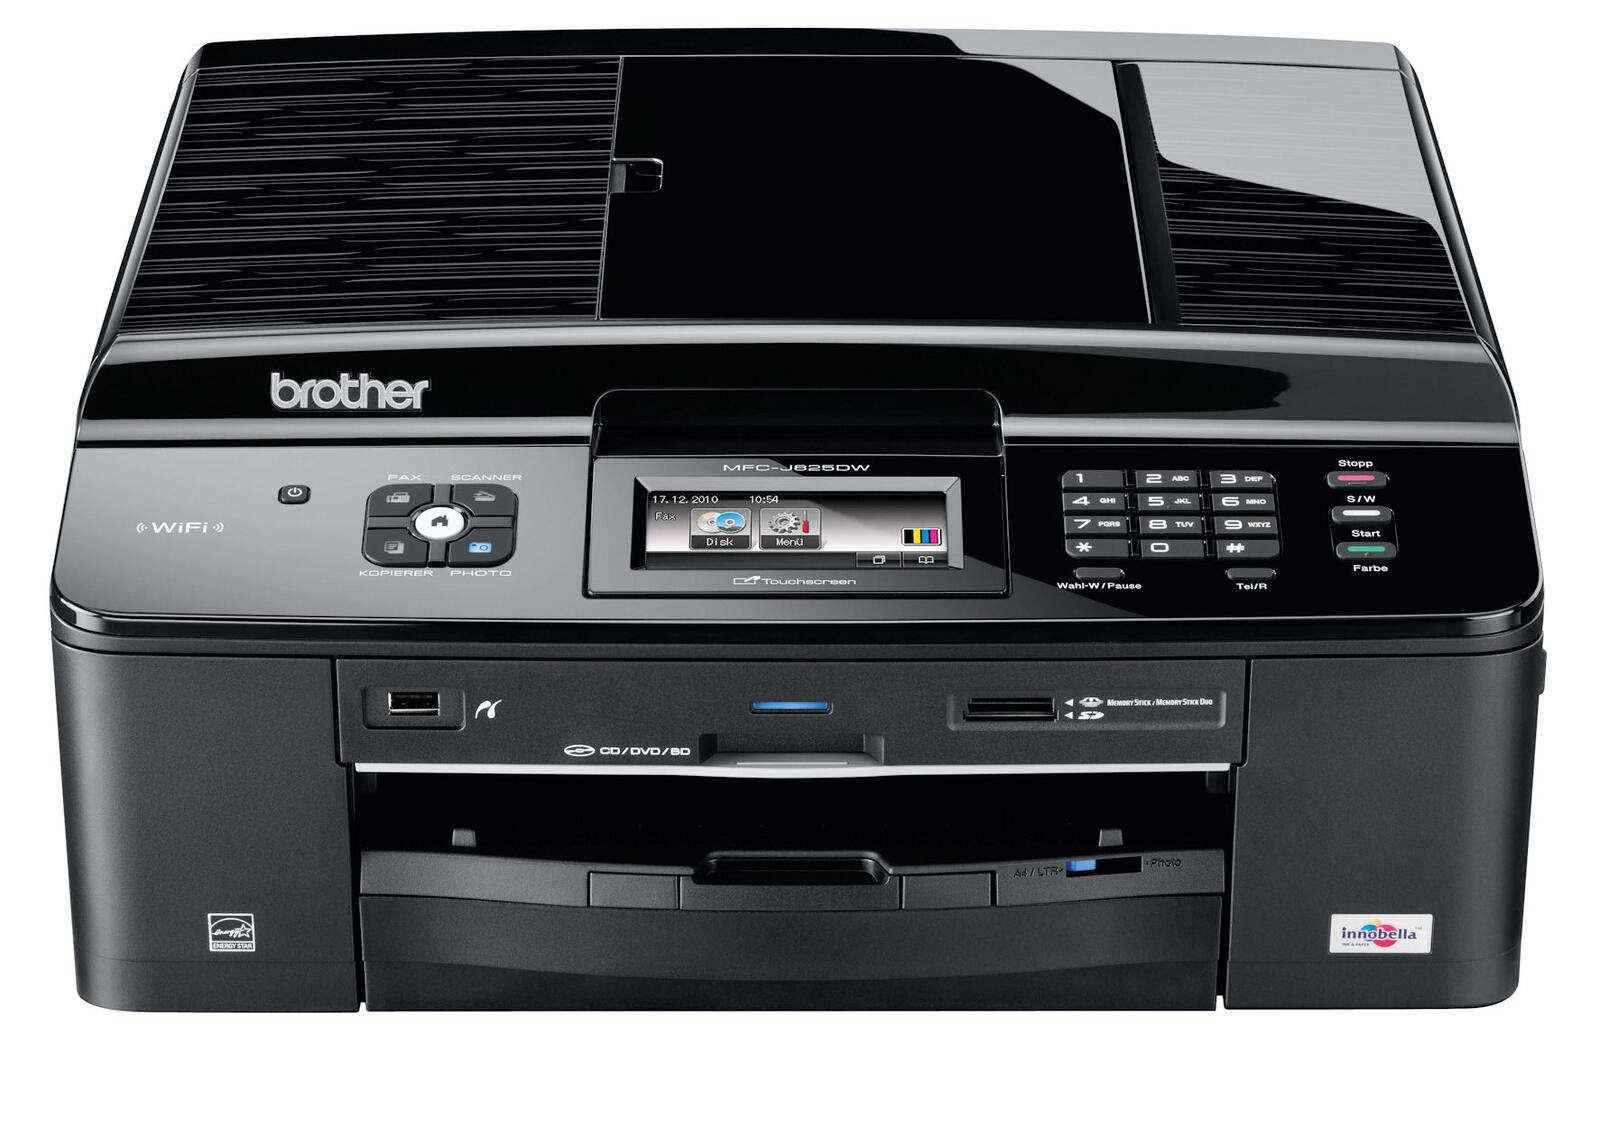 Brother MFC-J 625 DW